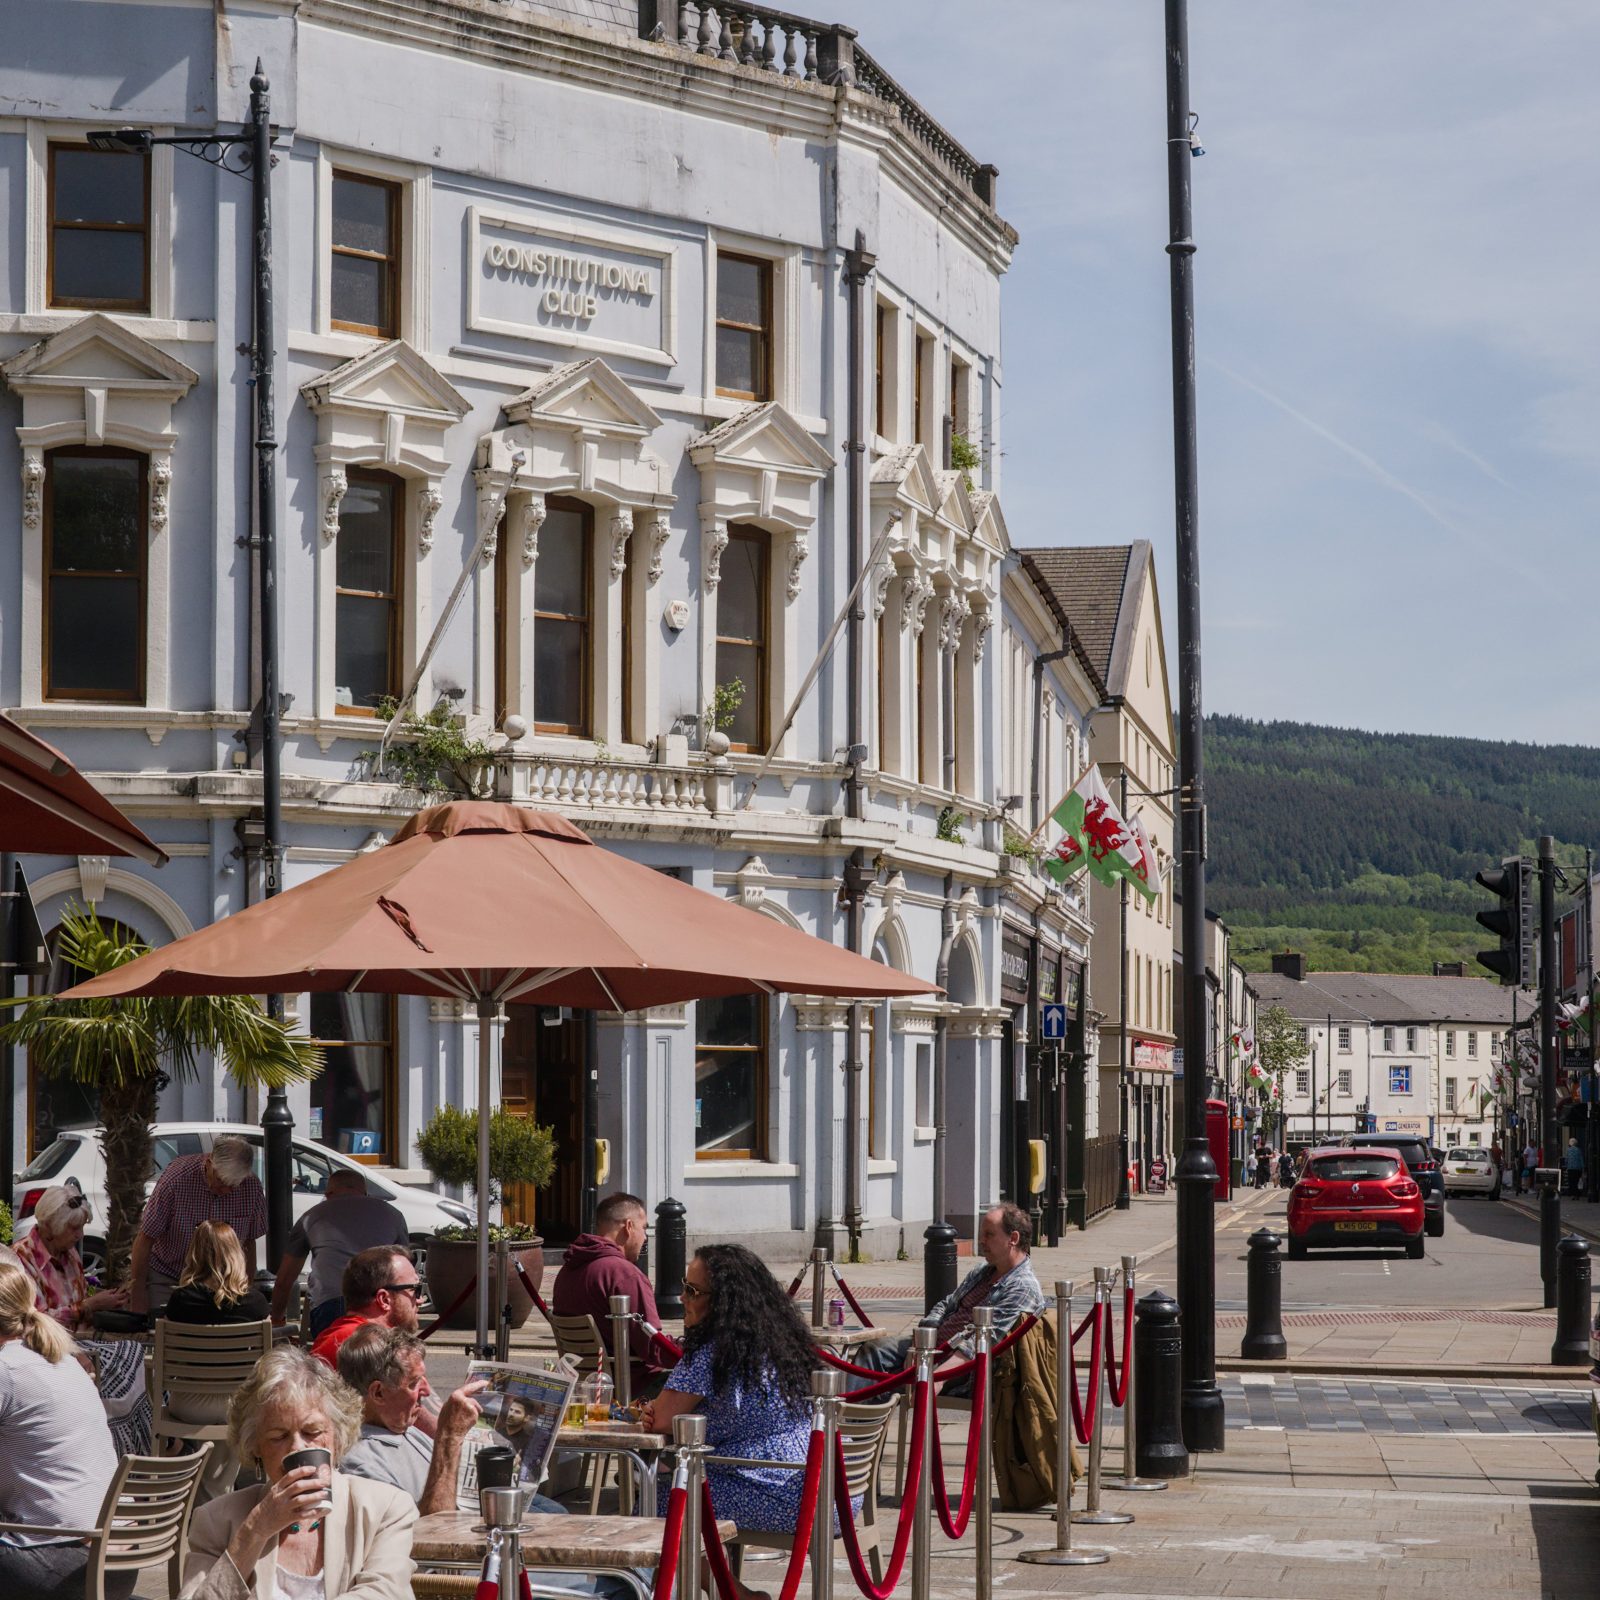 Trivallis Housing Landlord Wales Aberdare street scene featuring people dining outdoors at a cafe. The establishment is set in a light-coloured, ornate building labeled 